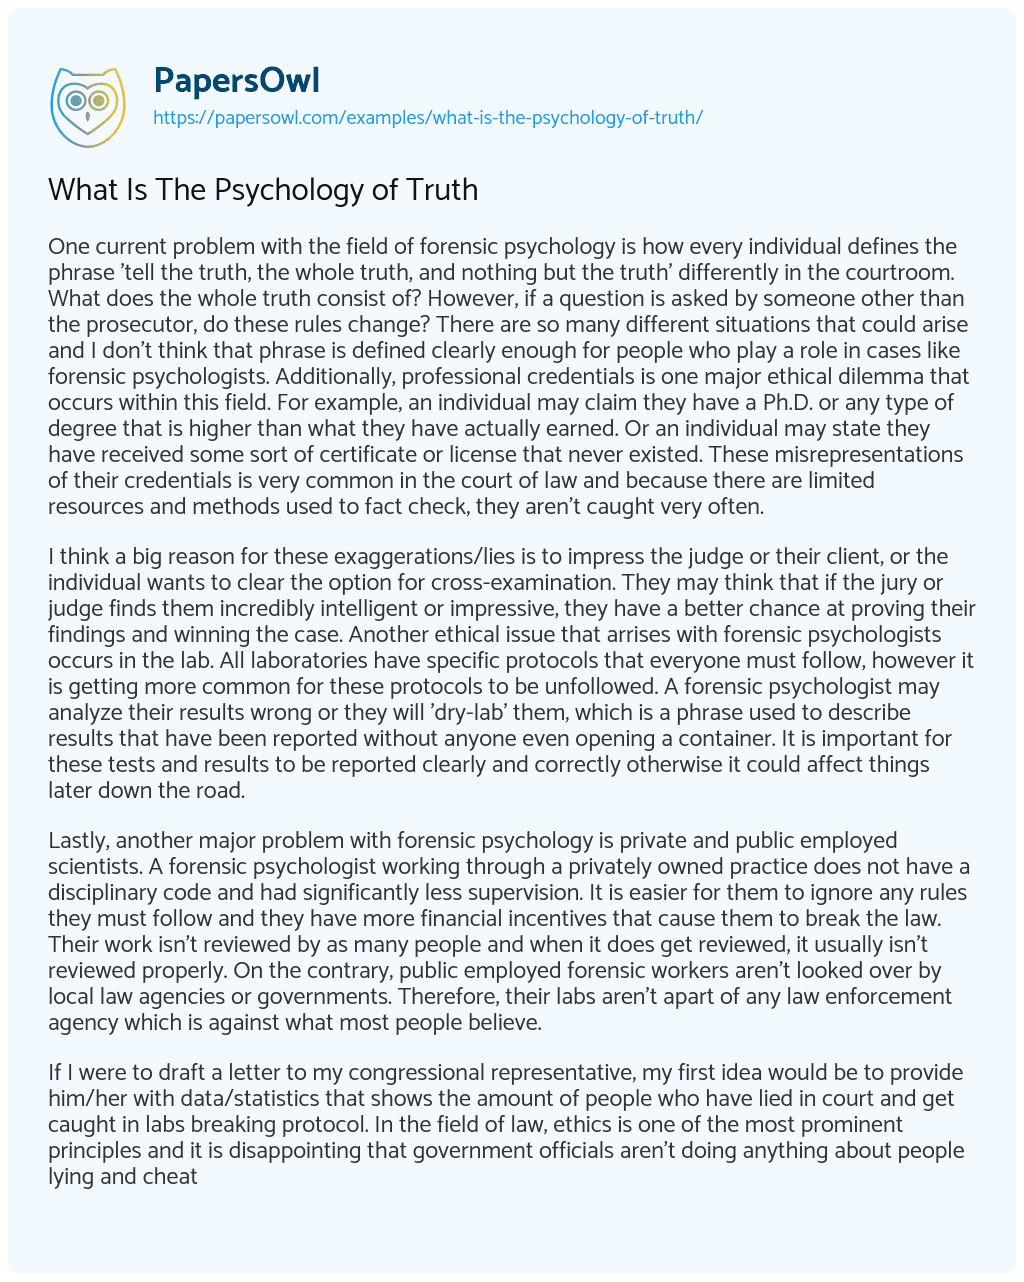 Essay on What is the Psychology of Truth